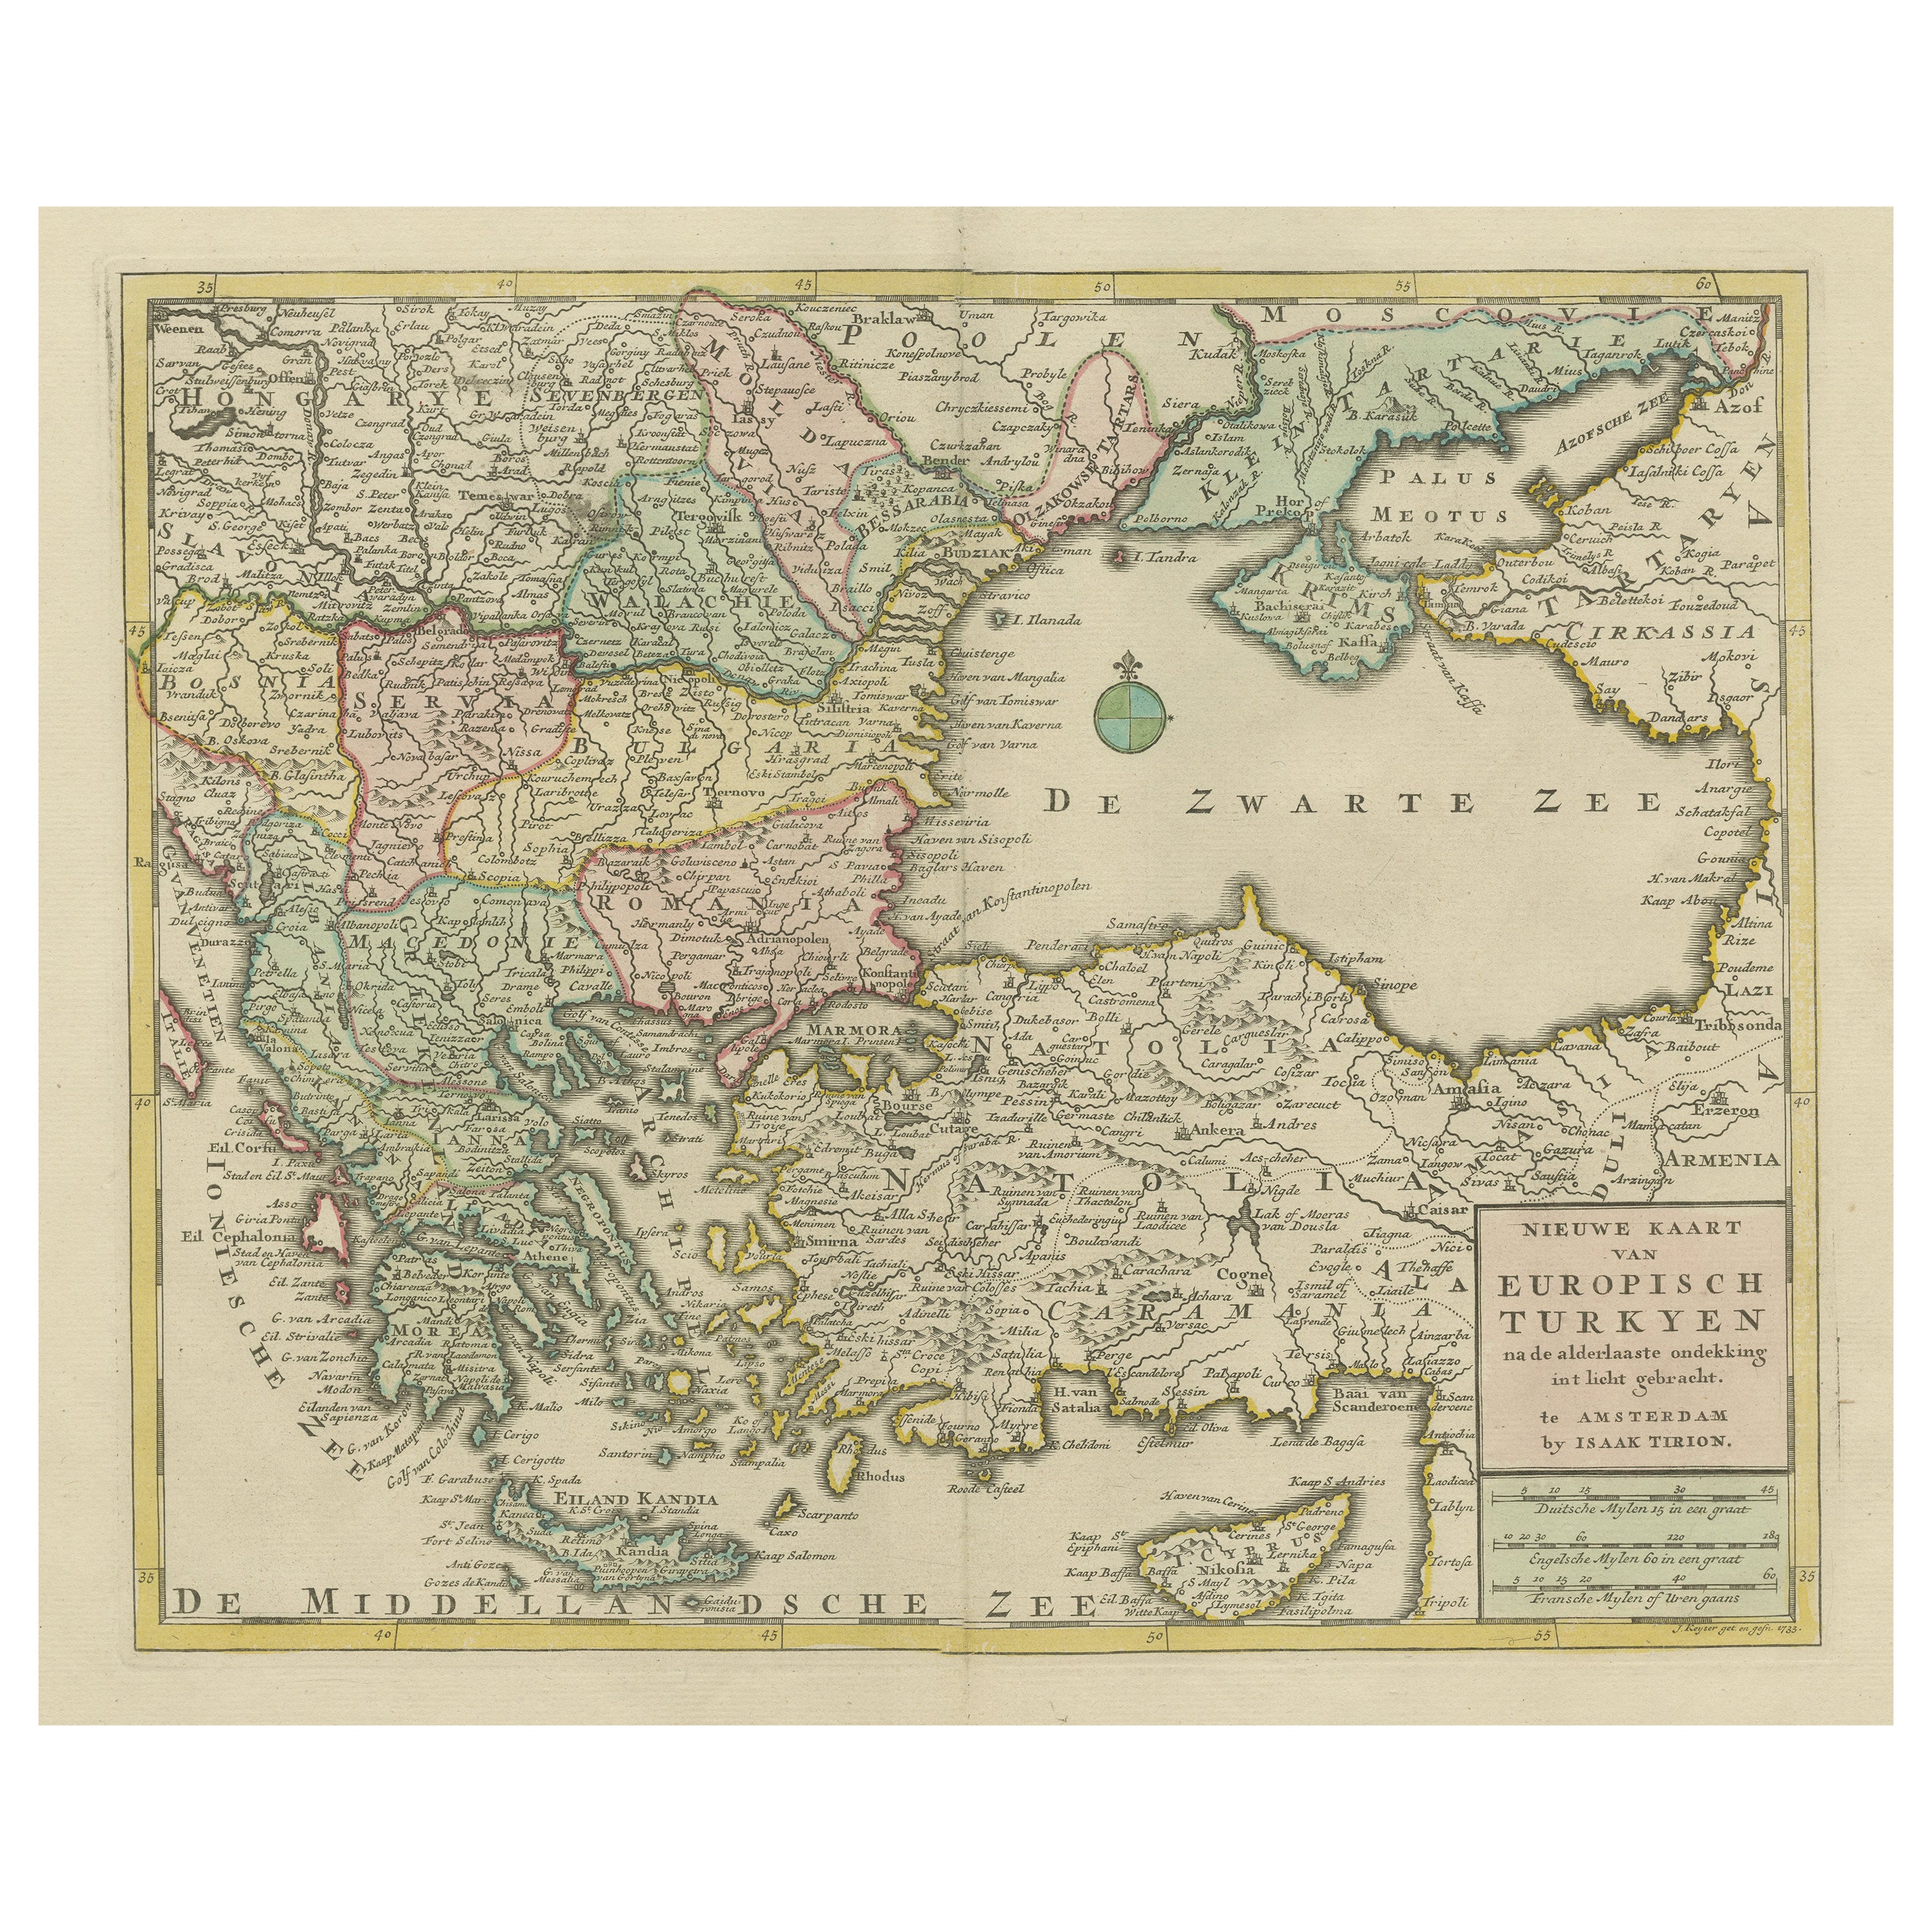 Antique Map of Greece, Turkey and surroundings with original coloring For Sale